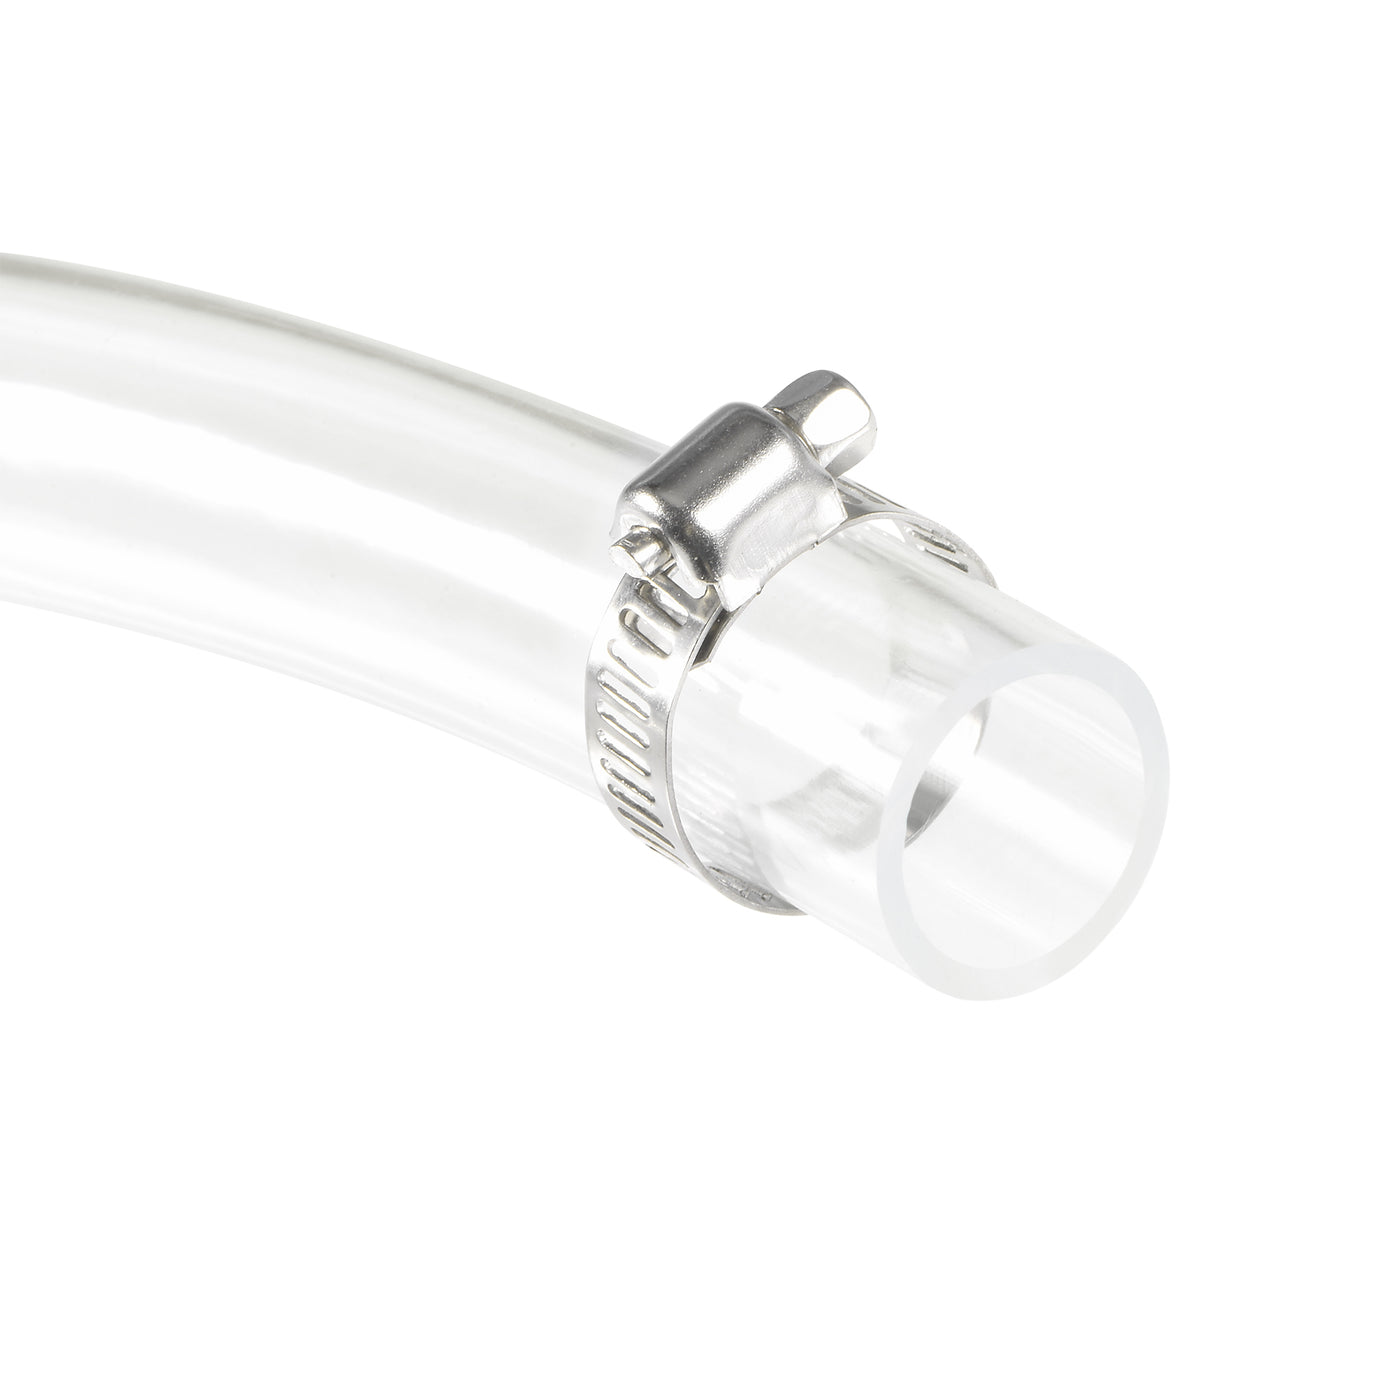 uxcell Uxcell PVC Clear Vinyl Tubing, 19mm(3/4") ID 24mm(15/16") OD 3.3ft Plastic Pipe Air Water Hose with Clamps